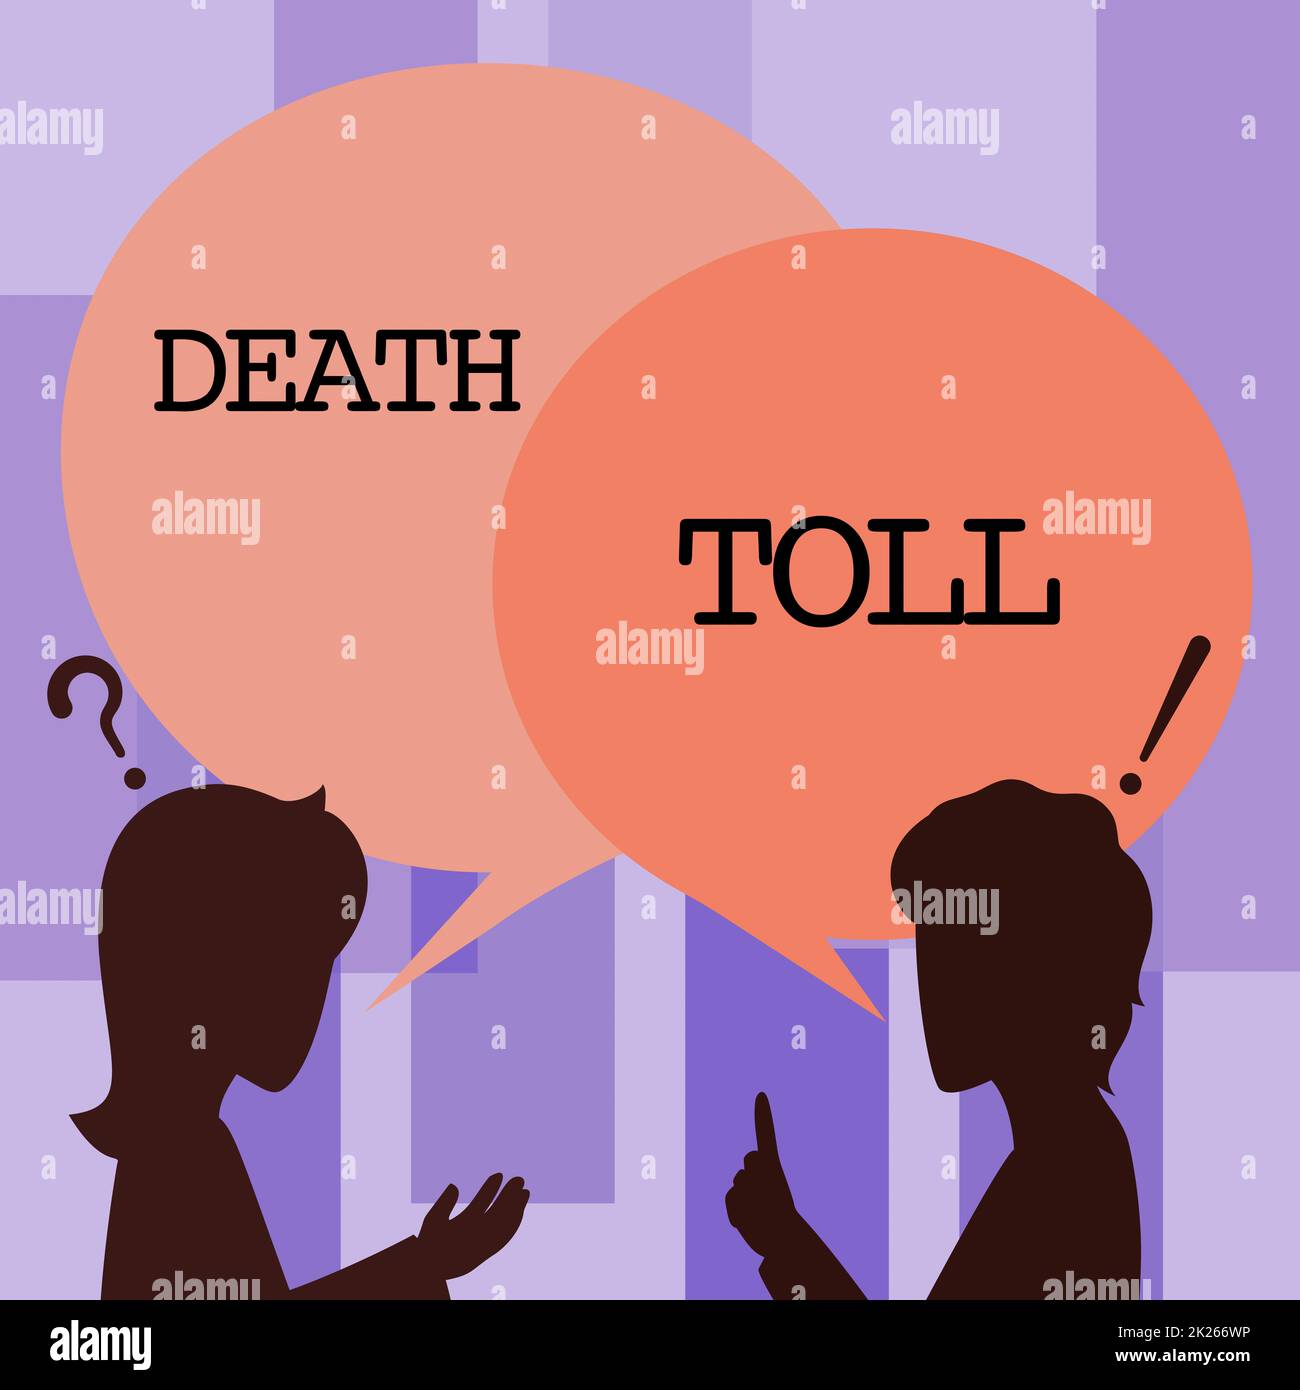 Inspiration showing sign Death Toll. Concept meaning the number of deaths resulting from a particular incident Couple Drawing With Chat Cloud Talking To Each Other Sharing Ideas. Stock Photo